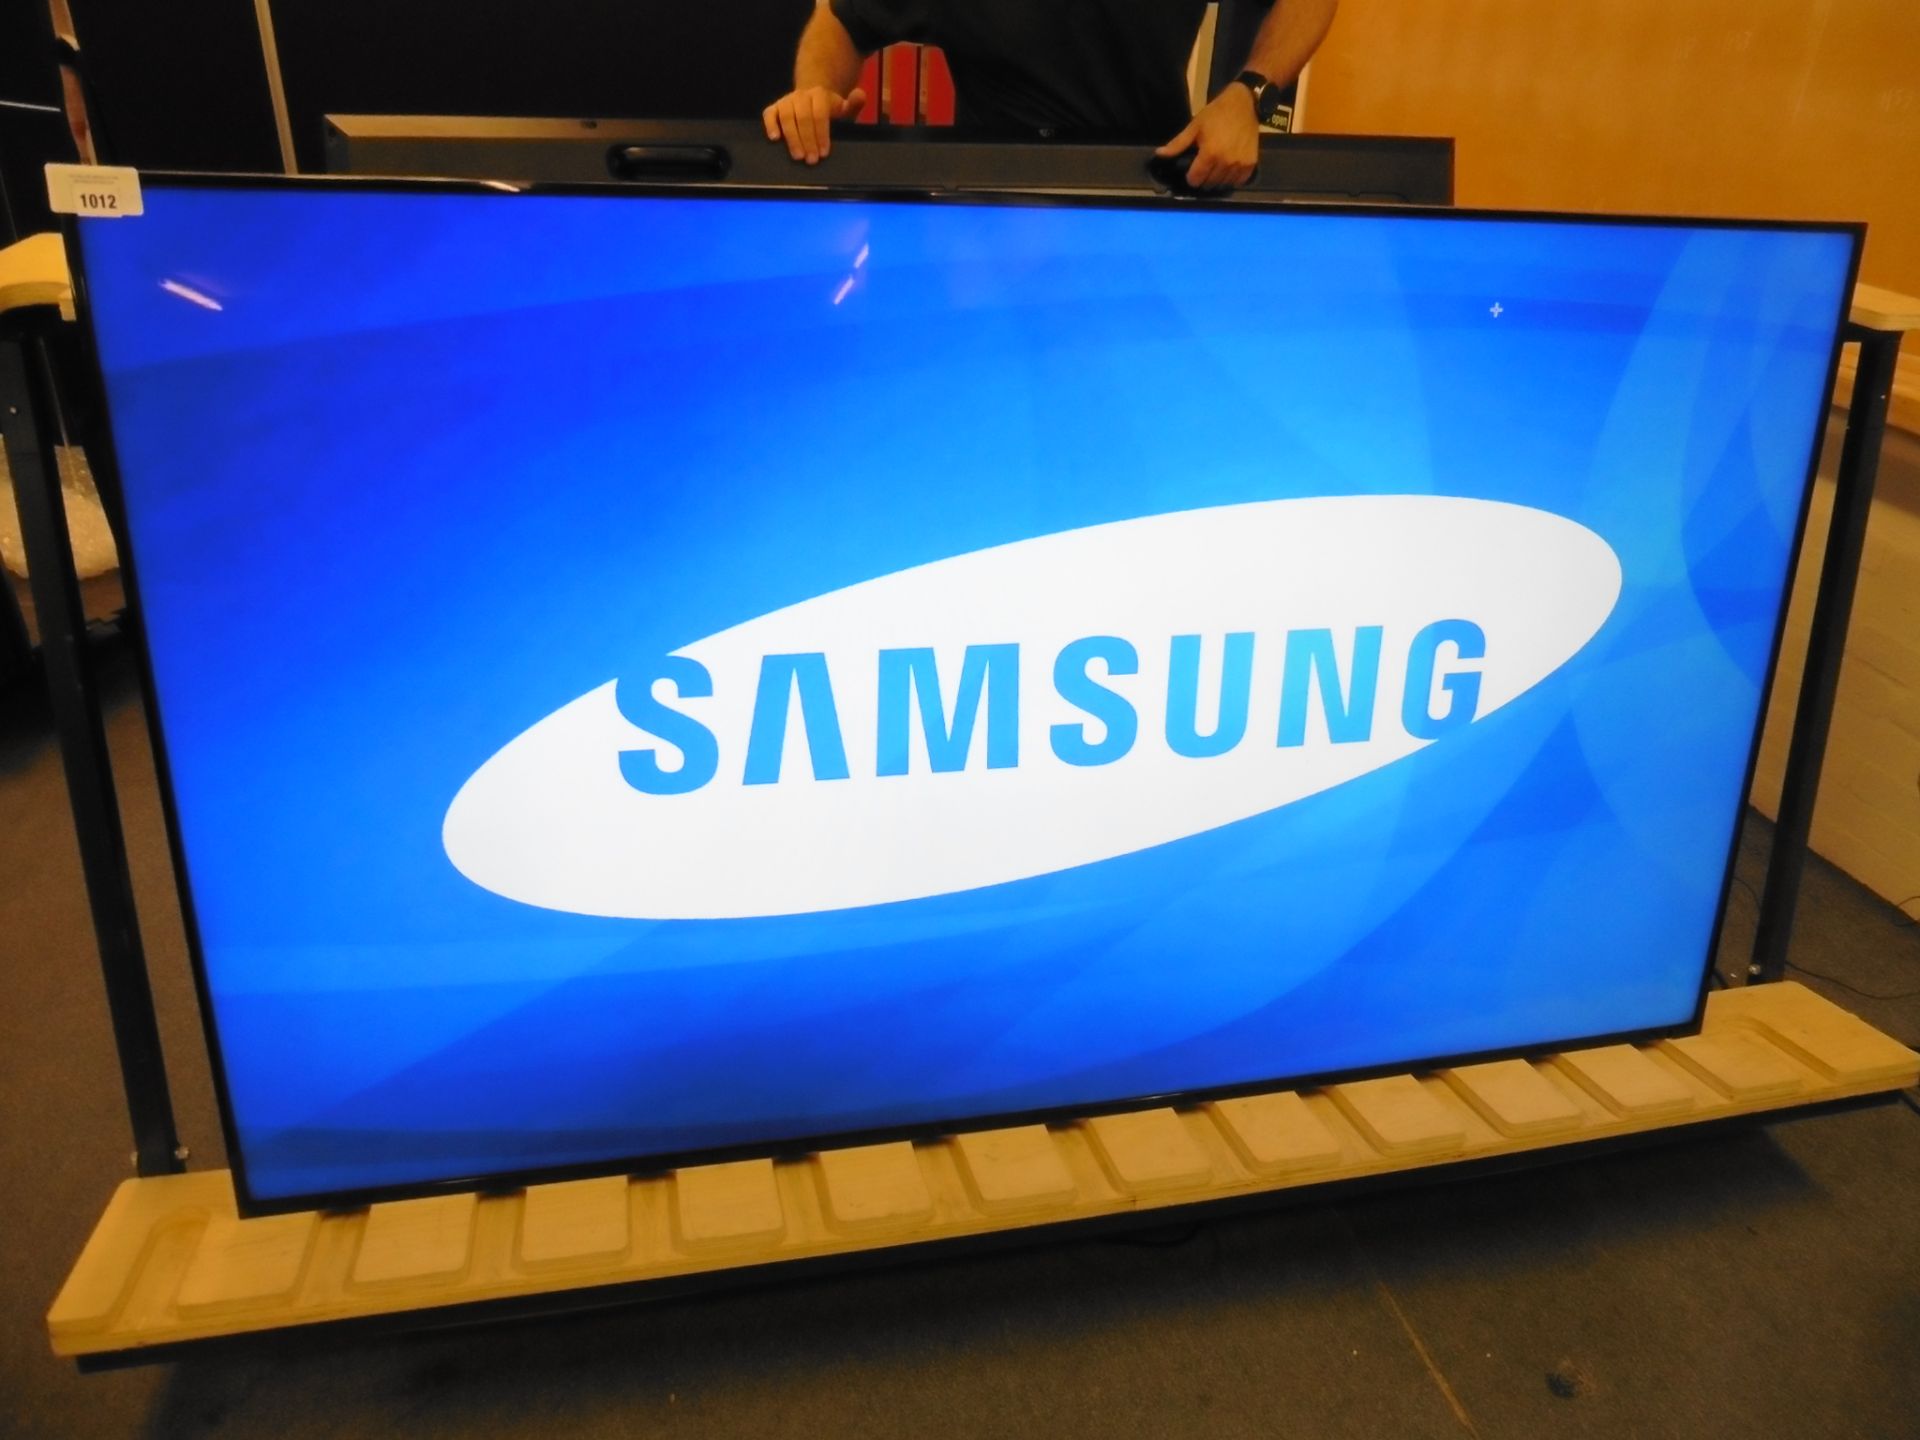 Samsung model LH75DMD professional display screen with remote (manufactured 2015, damage to frame